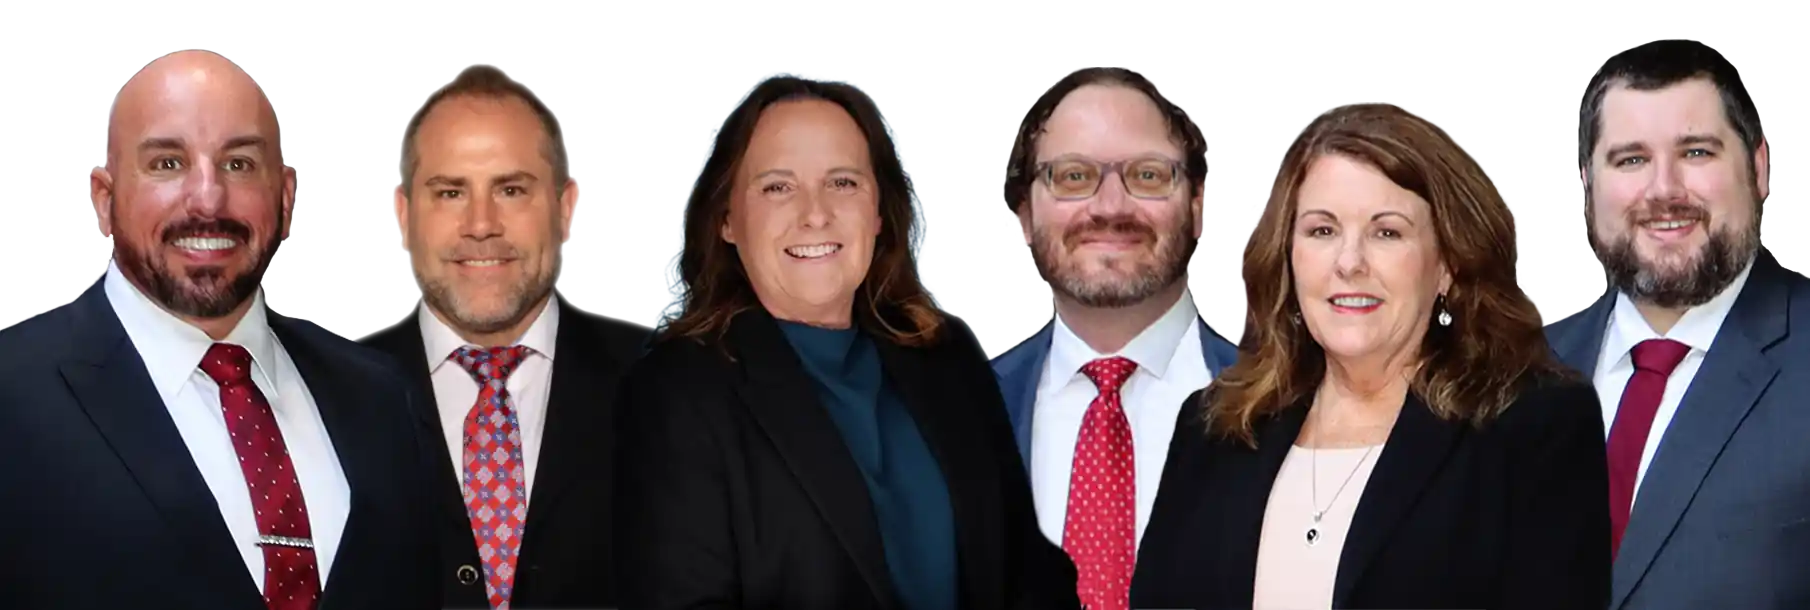 The Graham Family Law Team of attorneys at their San Antonio office.